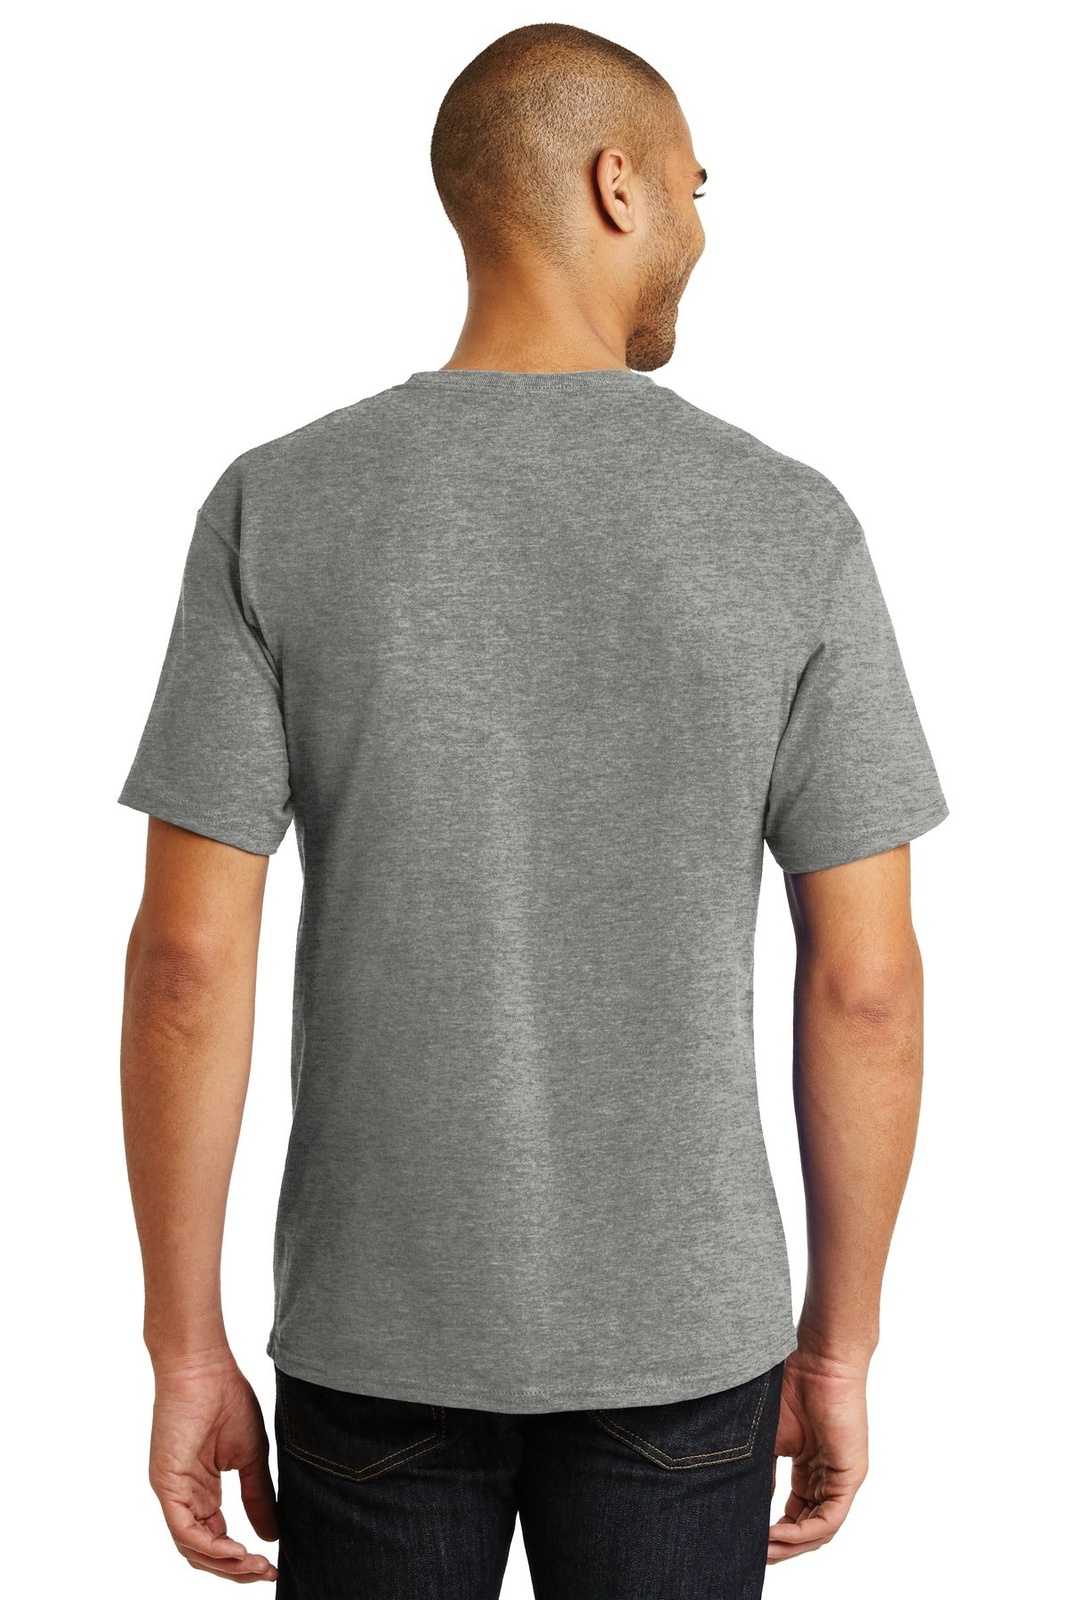 Hanes 5250 Tagless 100% Cotton T-Shirt - Oxford Gray - HIT a Double